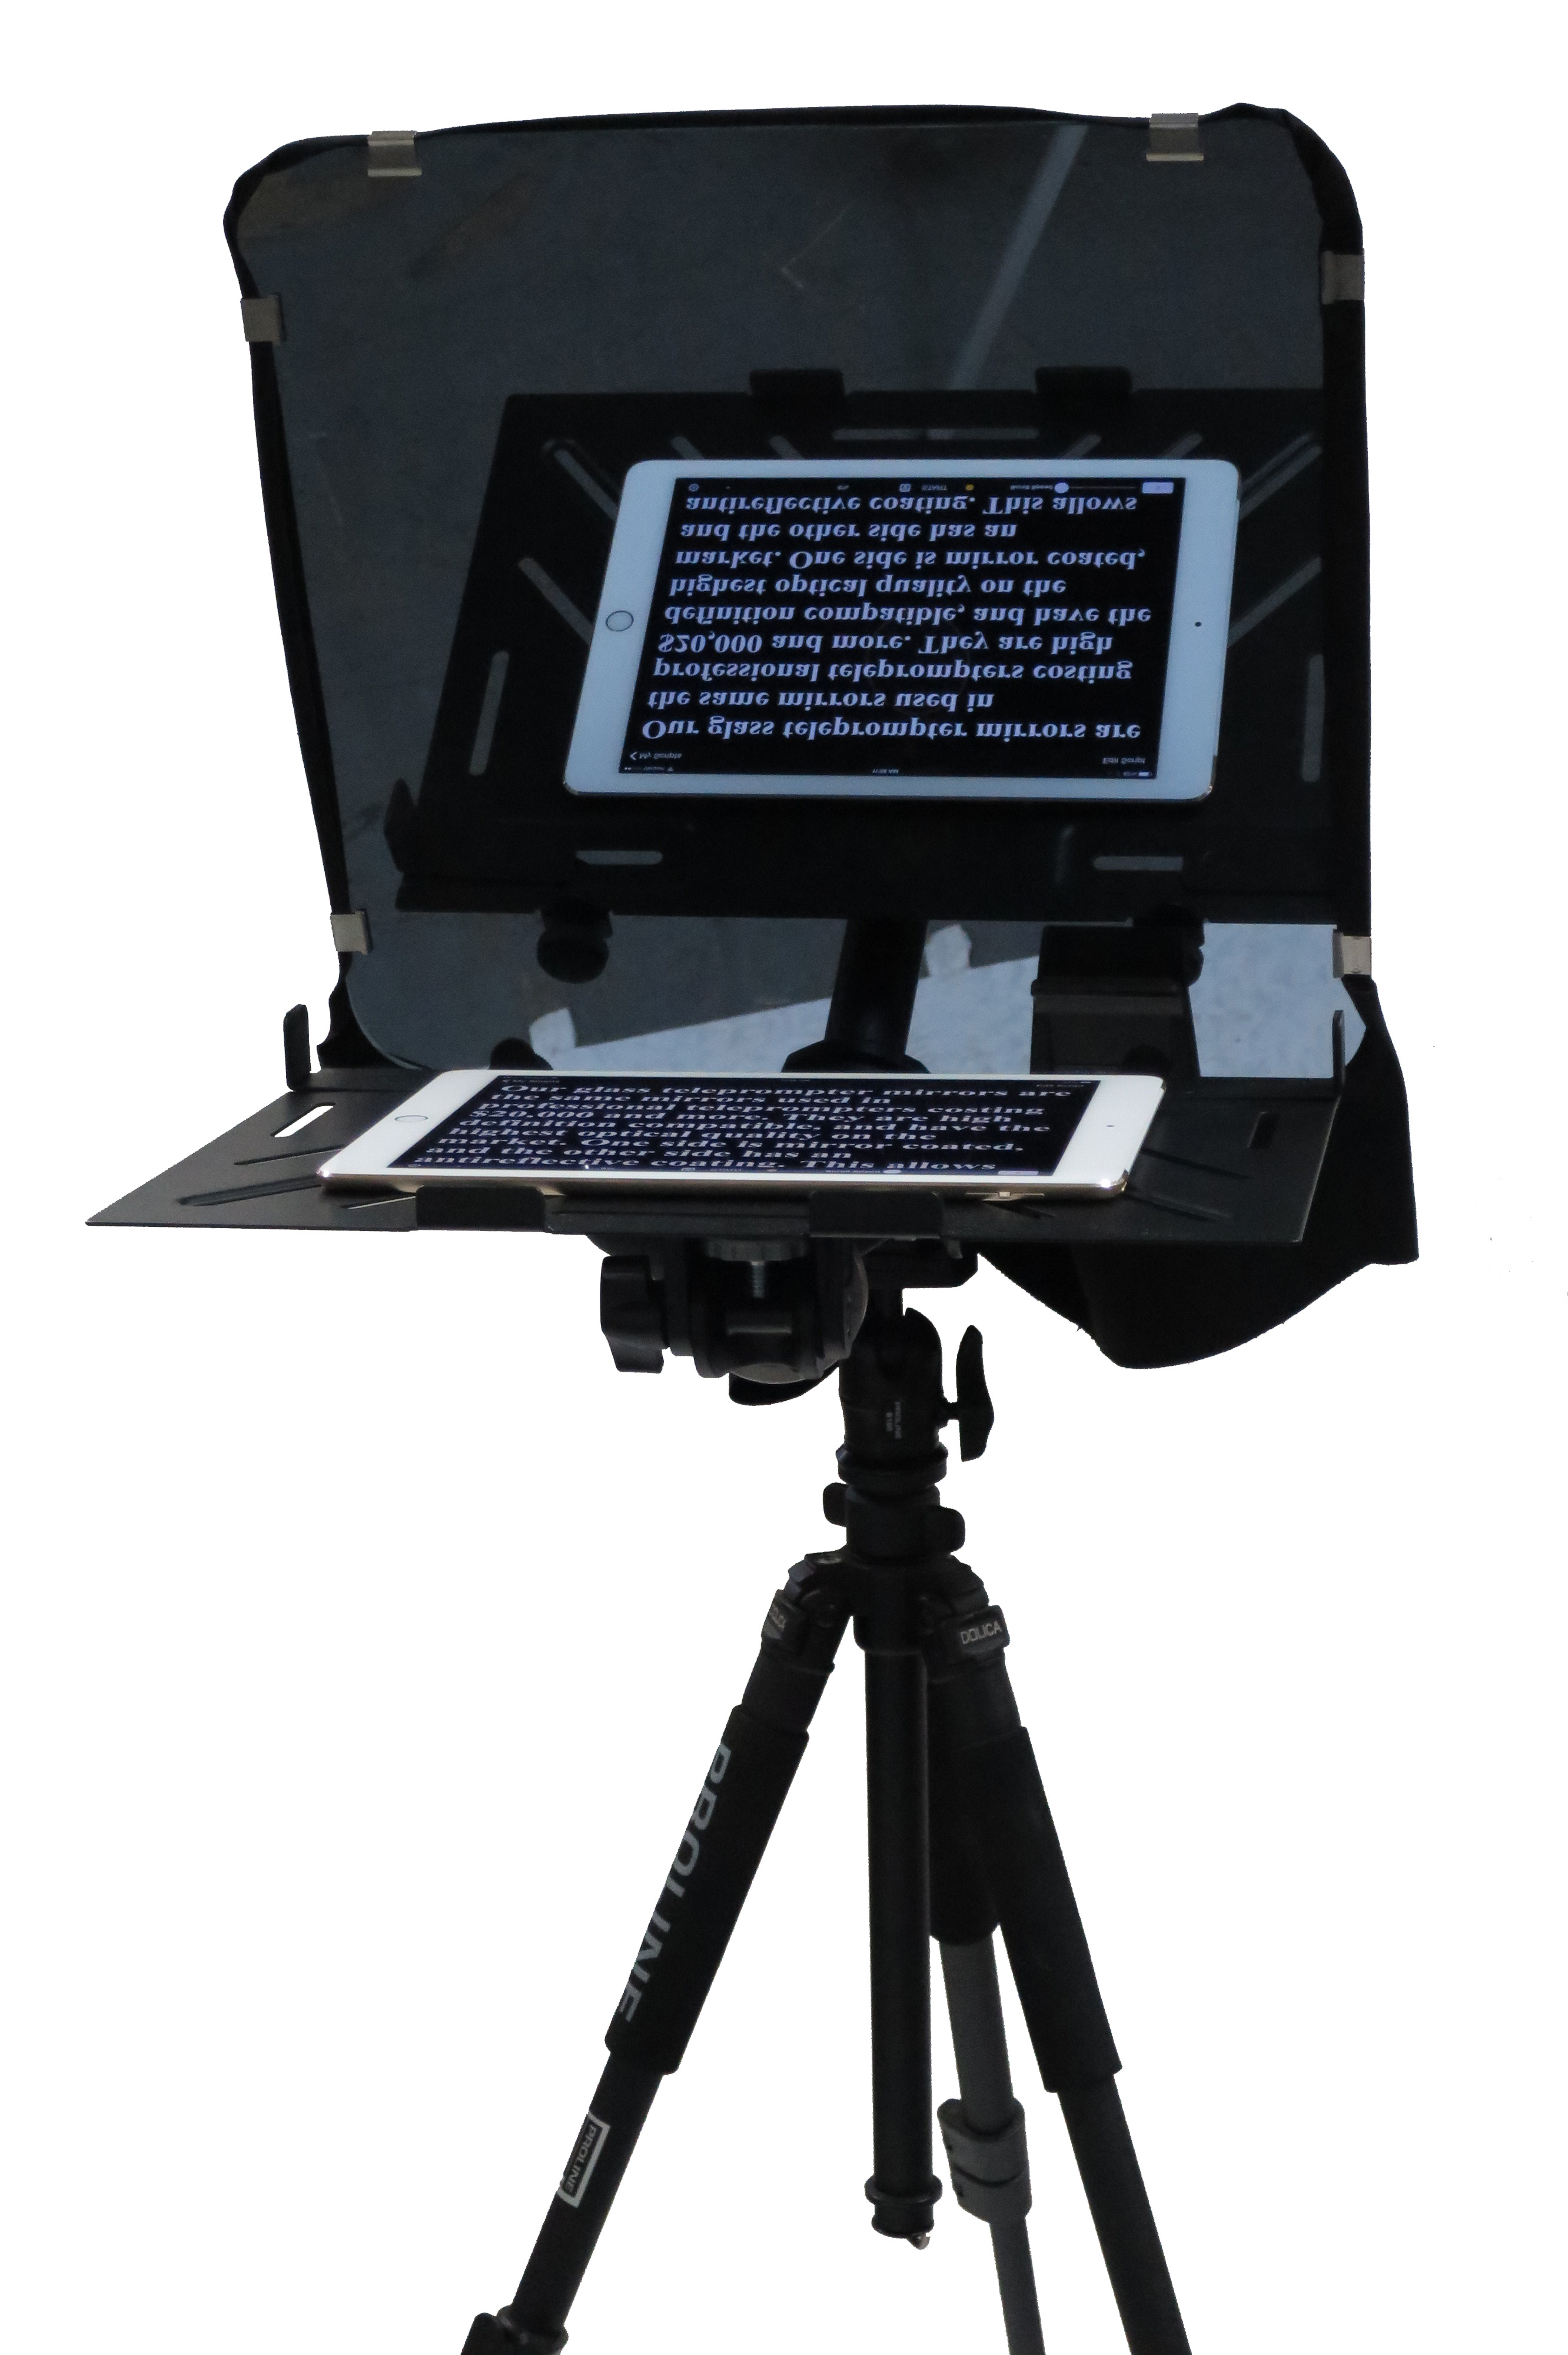 Free teleprompter software download mac download